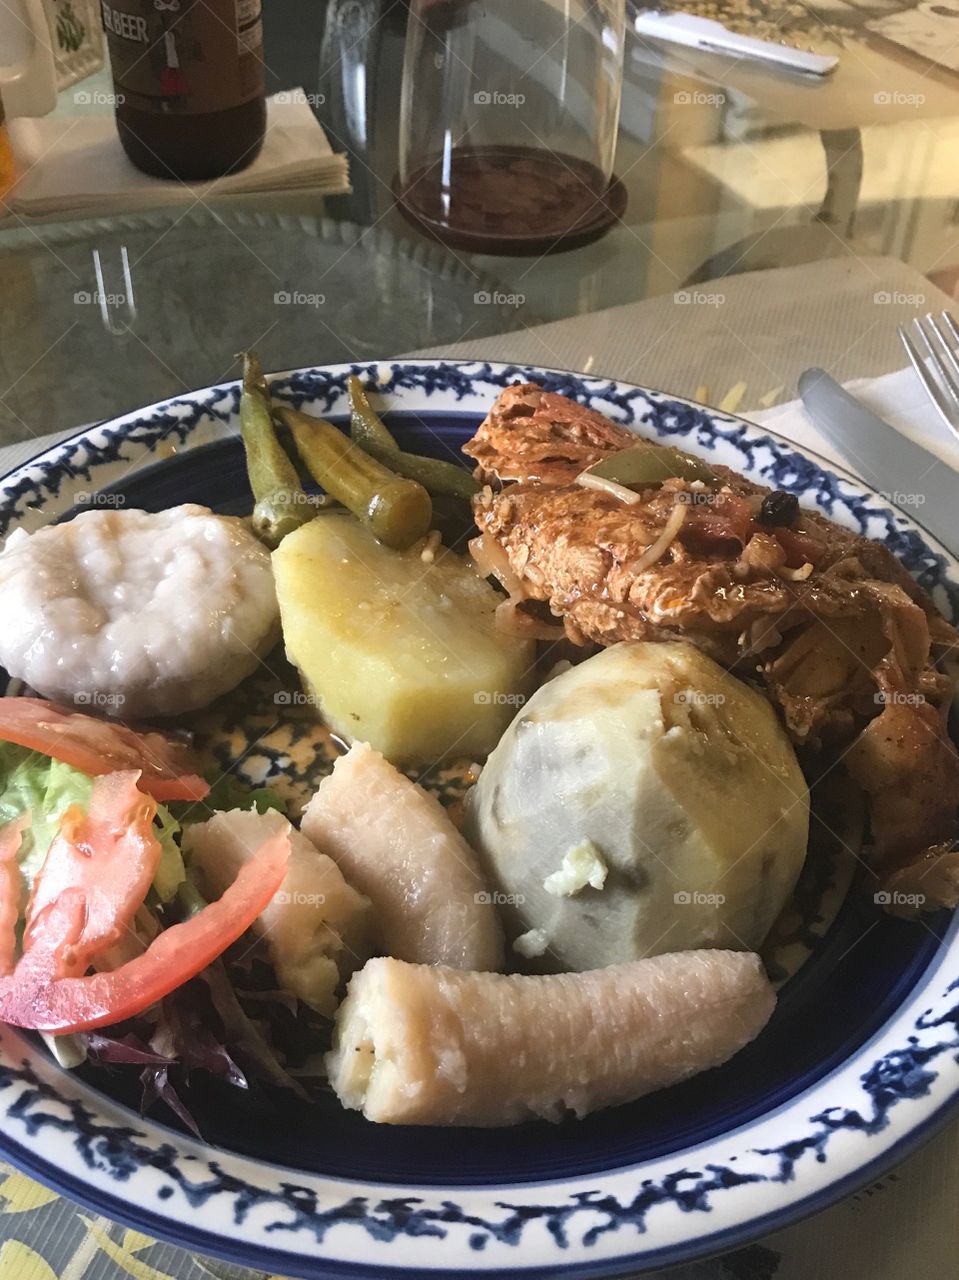 Stewed Red Snapper, yellow and white yam, green banana, dumplings salad and okras